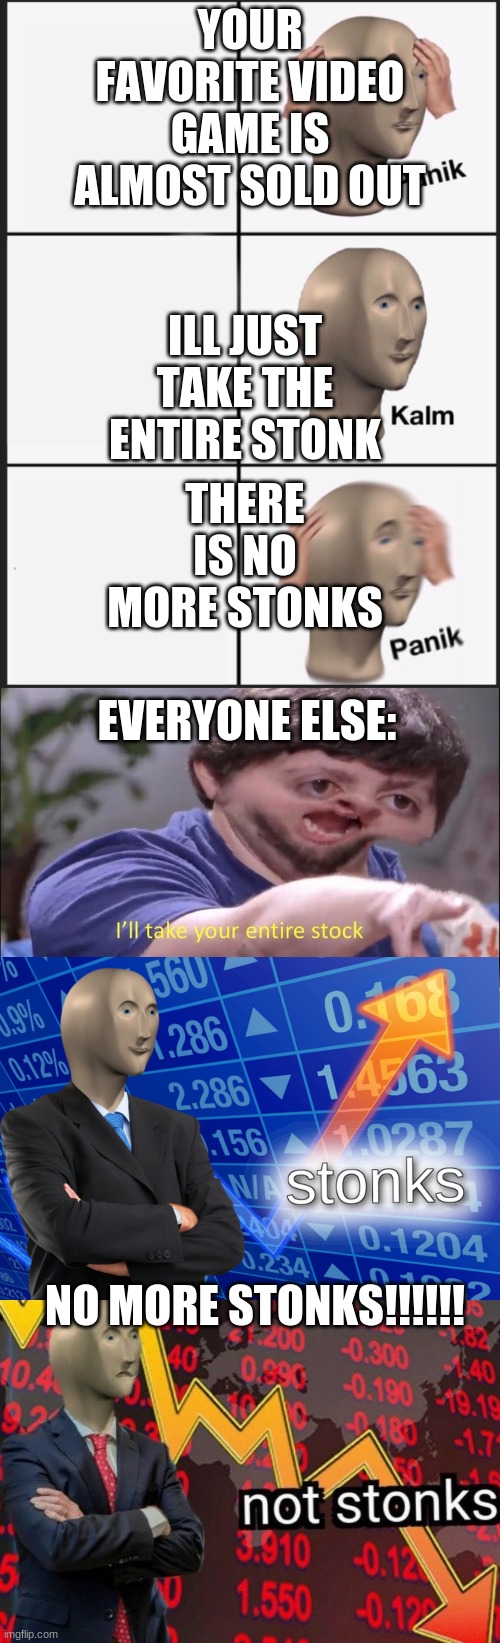 YOUR FAVORITE VIDEO GAME IS ALMOST SOLD OUT; ILL JUST TAKE THE ENTIRE STONK; THERE IS NO MORE STONKS; EVERYONE ELSE:; NO MORE STONKS!!!!!! | image tagged in i'll take your entire stock,stonks not stonks,memes,panik kalm panik | made w/ Imgflip meme maker